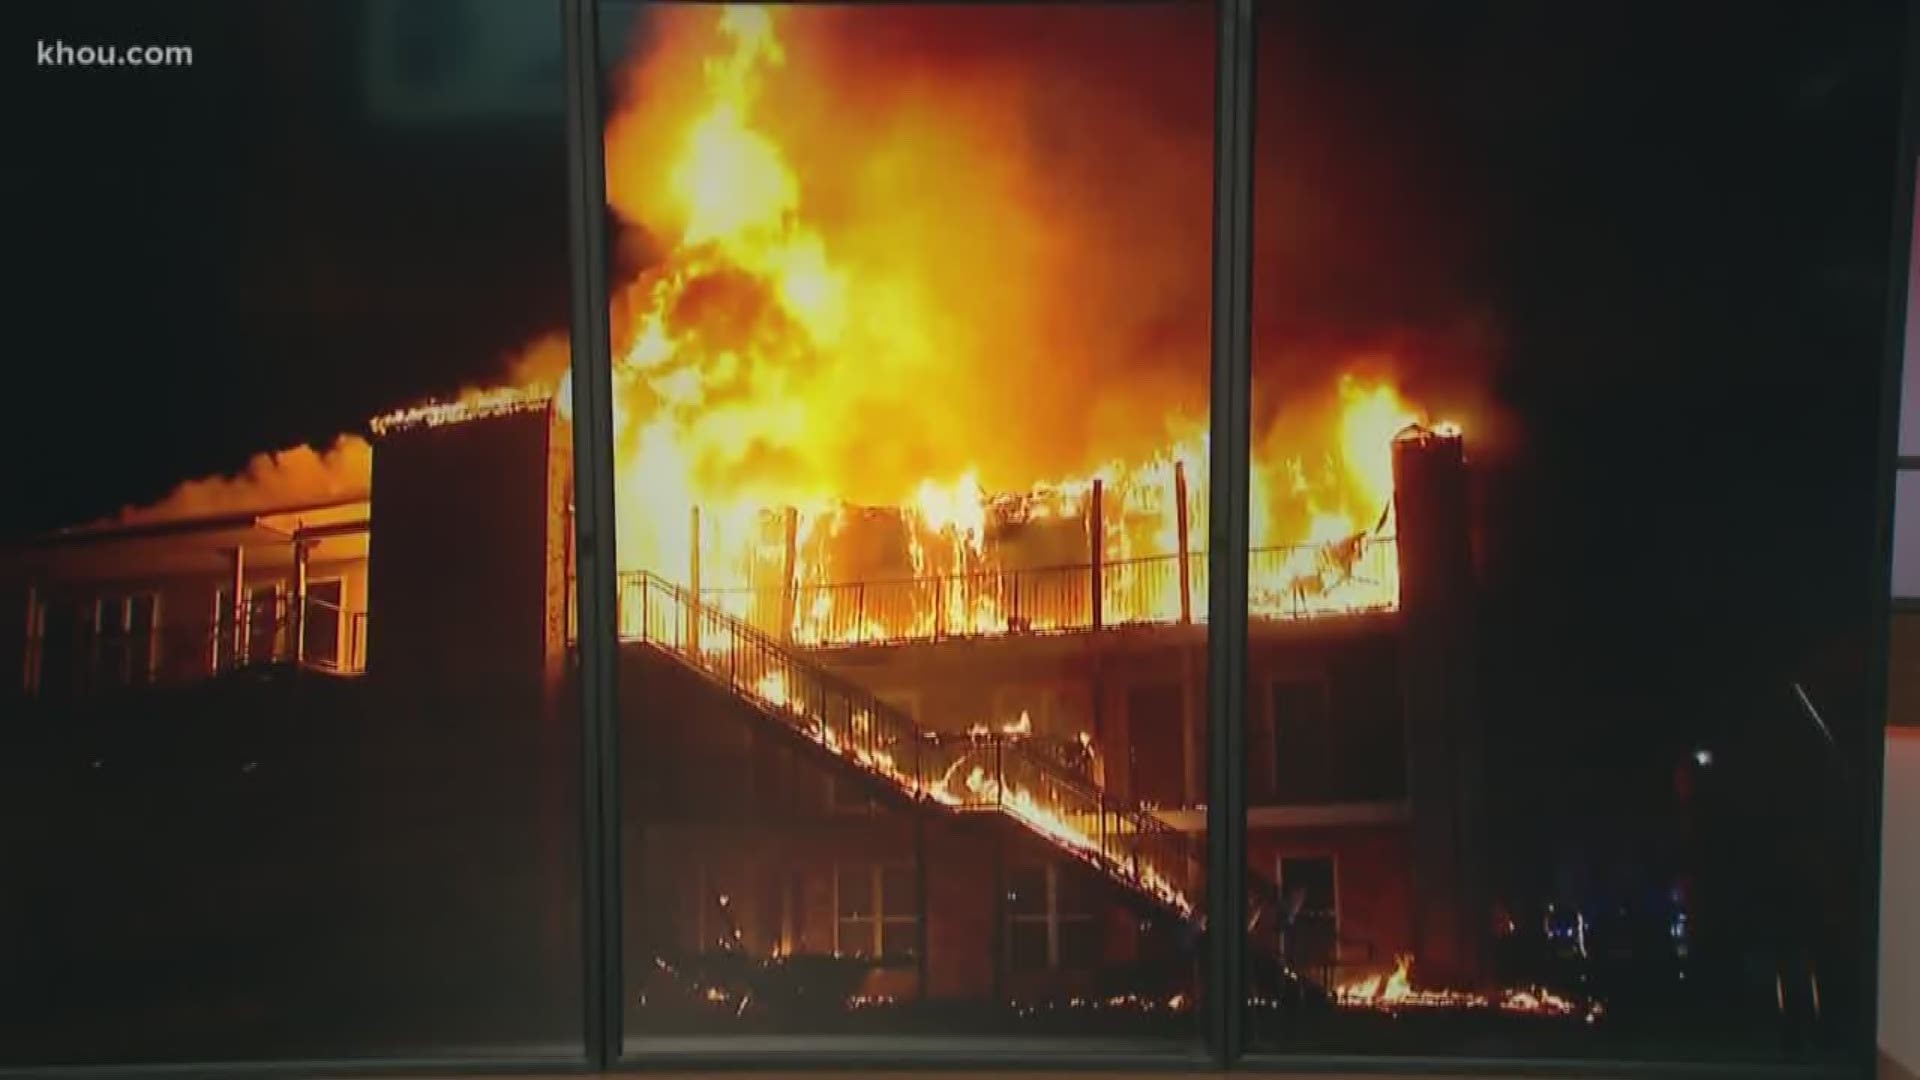 Fire crews battle a multi-alarm fire in Northeast Harris County, Chita has details on rain in the weekend forecast and the Astros win, these are some of the top headlines from #HTownRush at 5 a.m.